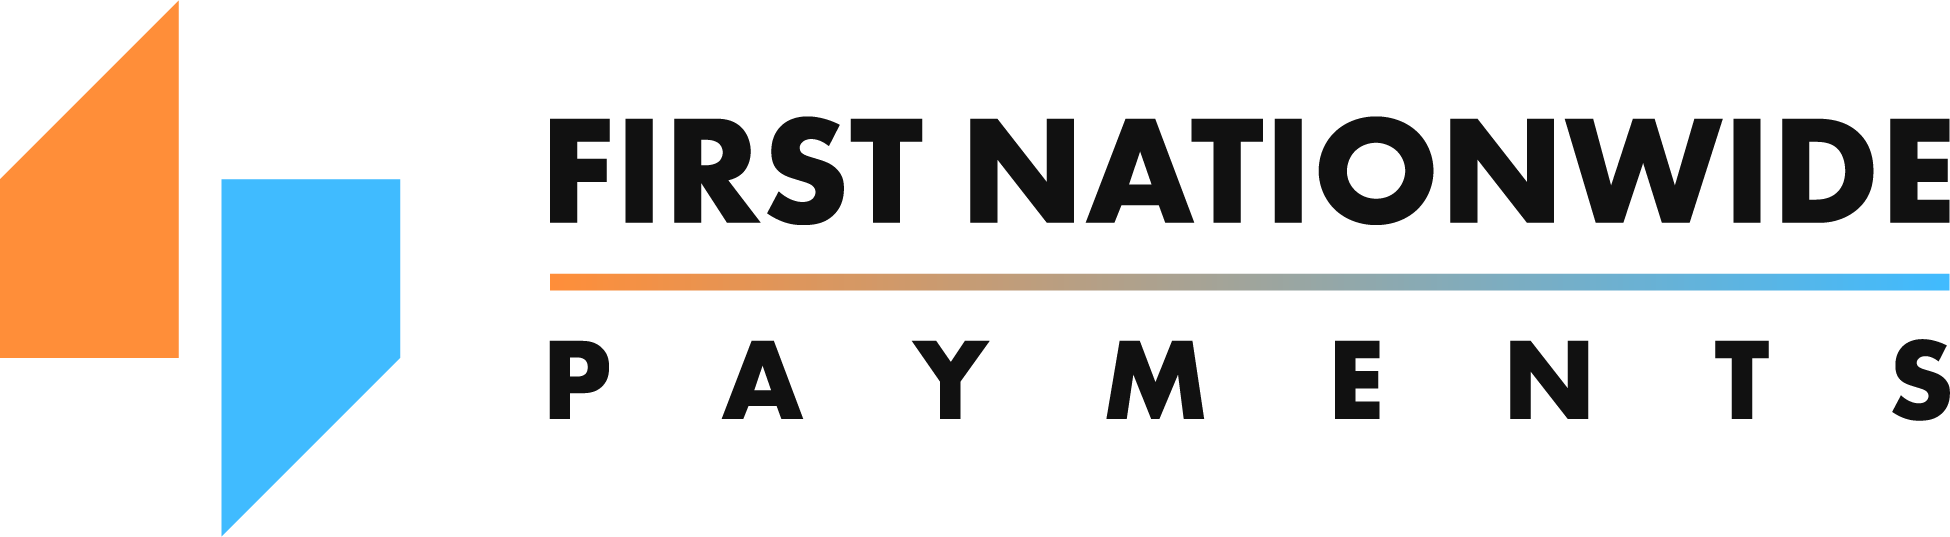 First Nationwide Payments logo